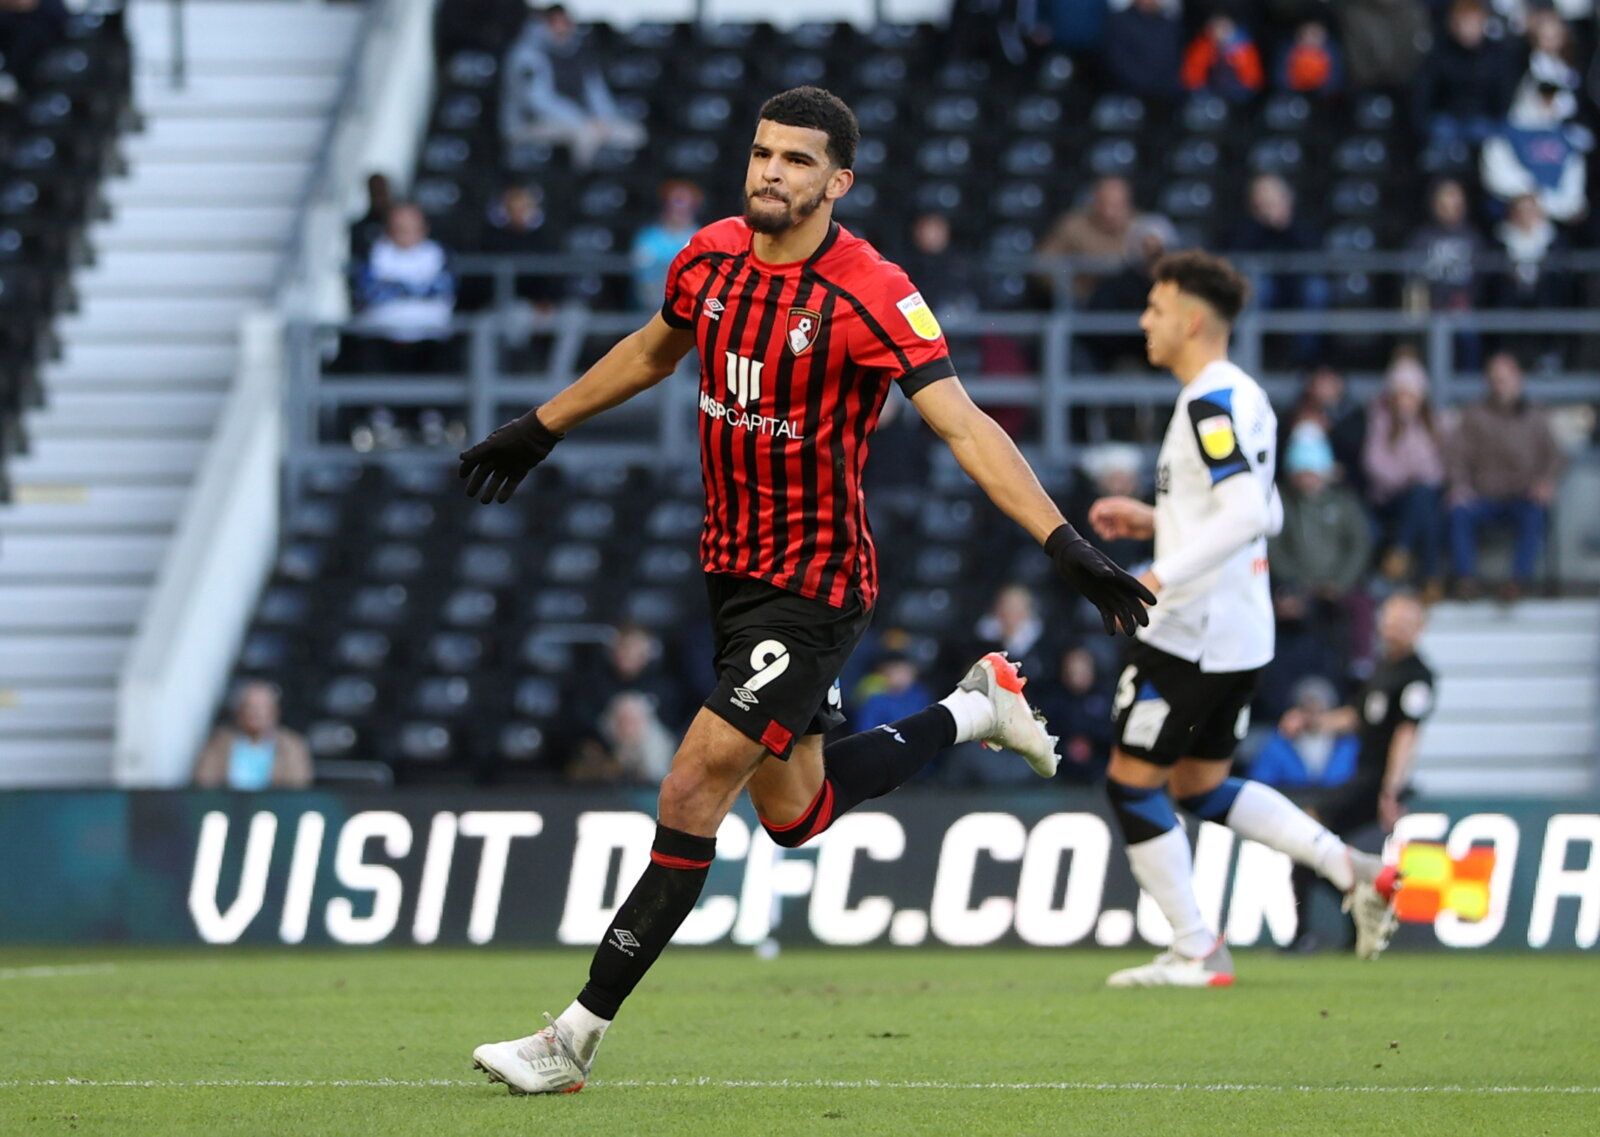 Soccer Football - Championship - Derby County v AFC Bournemouth - Pride Park, Derby, Britain - November 21, 2021 Bournemouth's Dominic Solanke celebrates after scoring their second goal Molly Darlington/Action Images